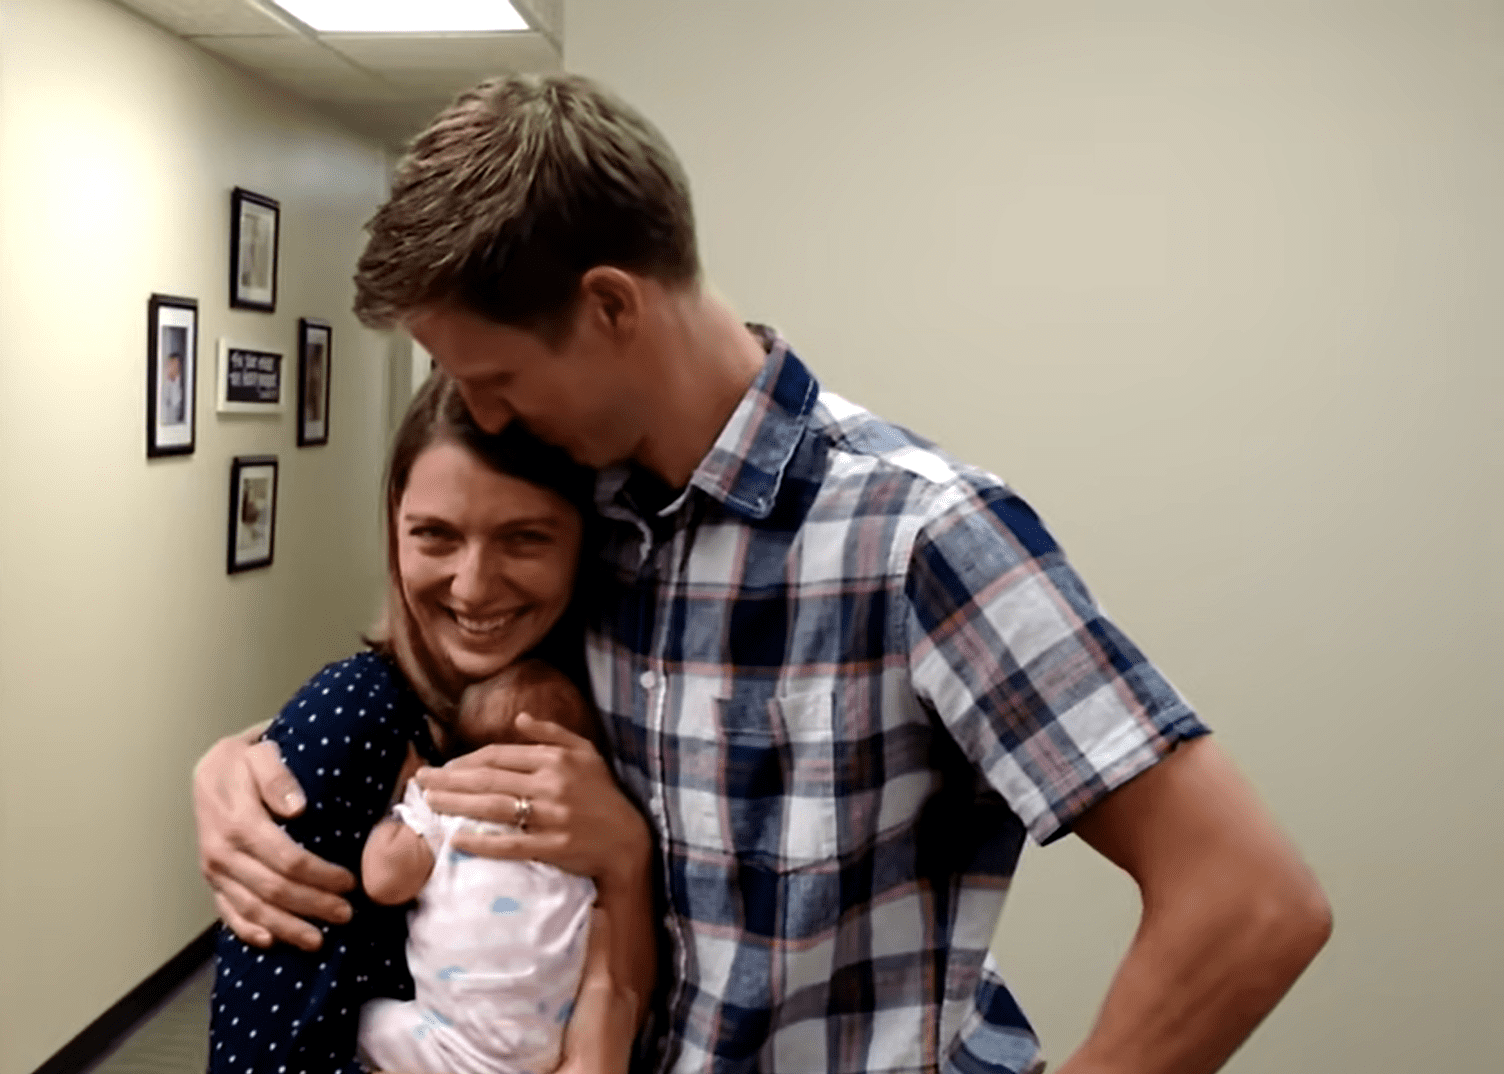 Matt and Katie Curtis meeting and holding their adopted baby, Natalie Gray, for the first time.│Source: youtube.com/Genesis Media